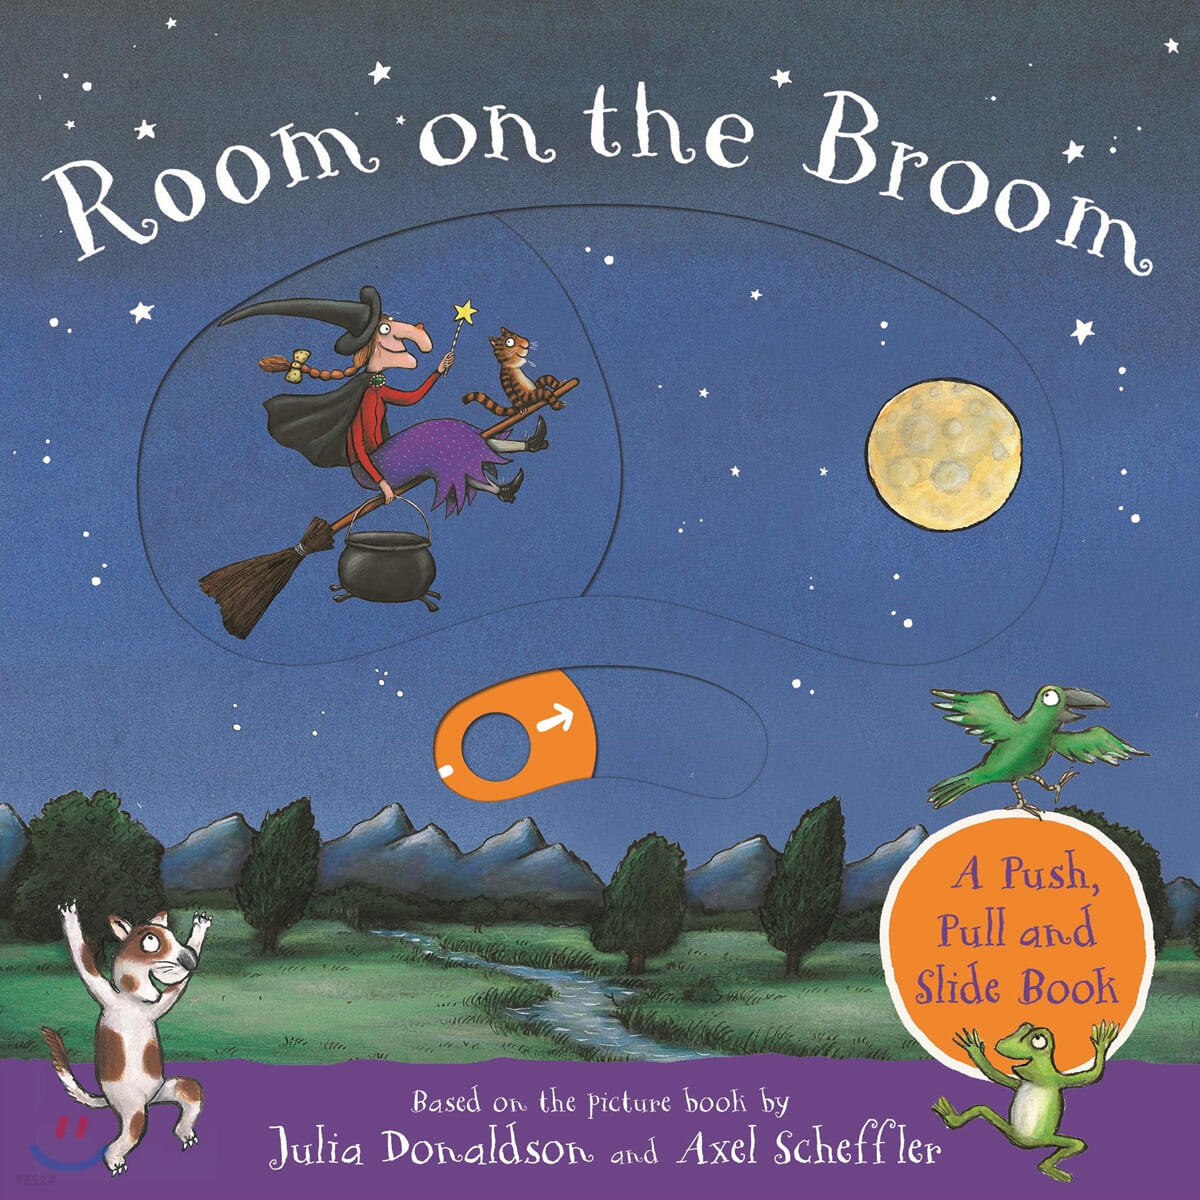 Room on the Broom (A Push, Pull and Slide Book)